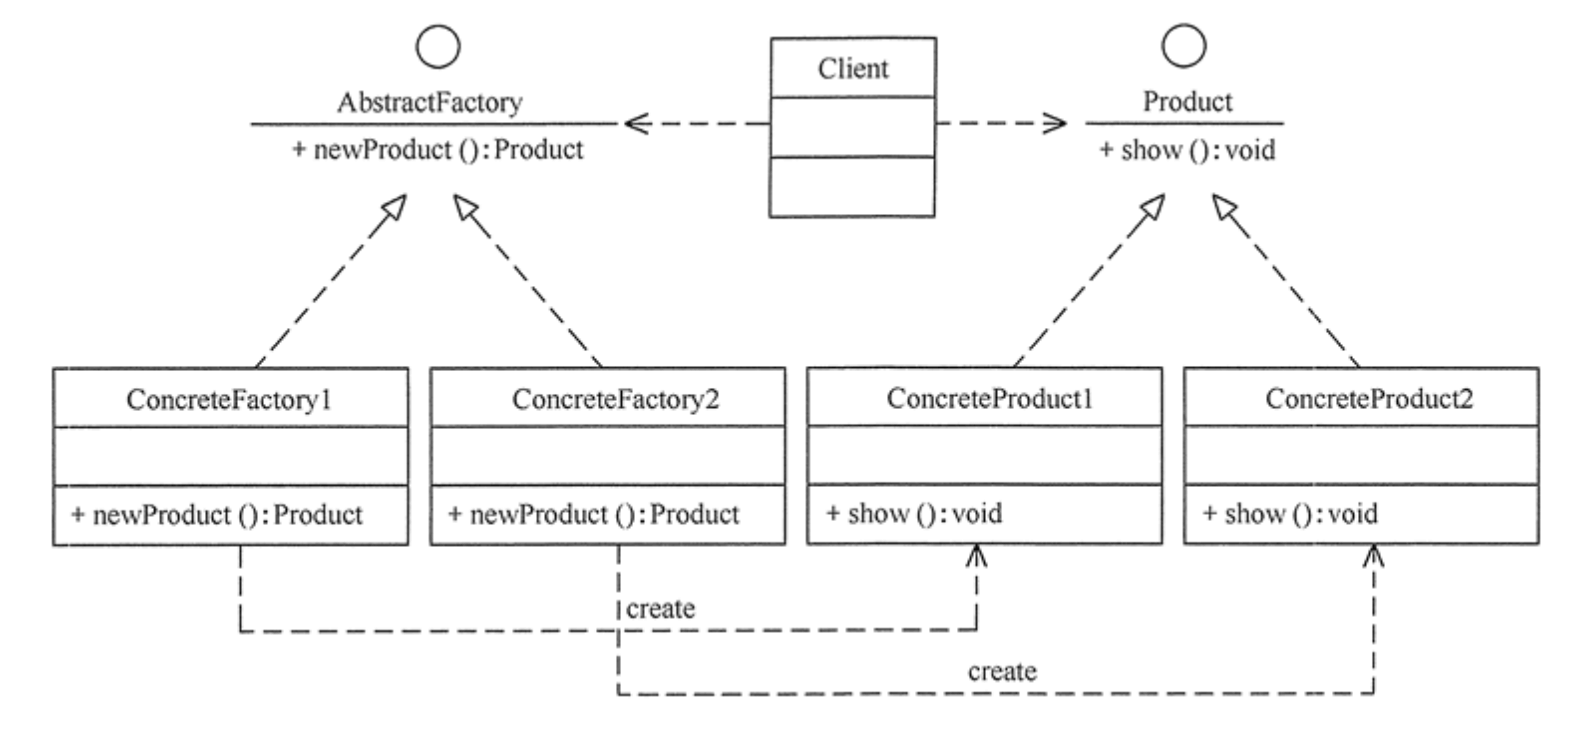 How to implement the factory method pattern using Java code